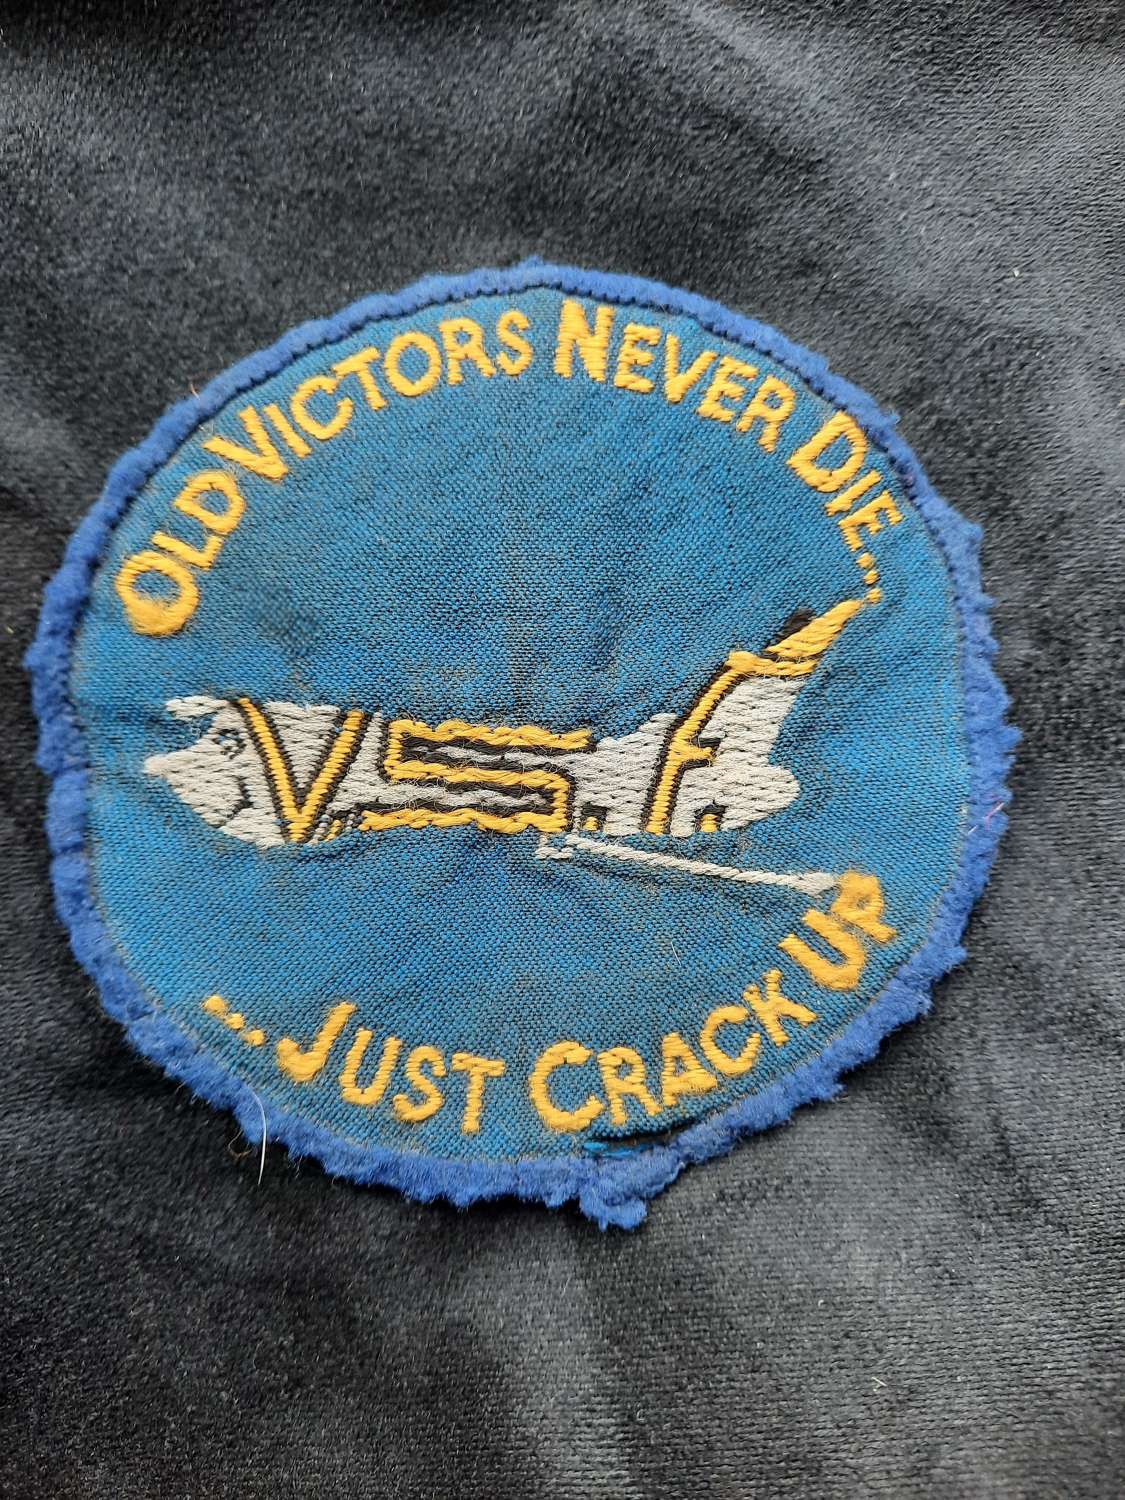 Old Victor's Never Die Just Crack up patch